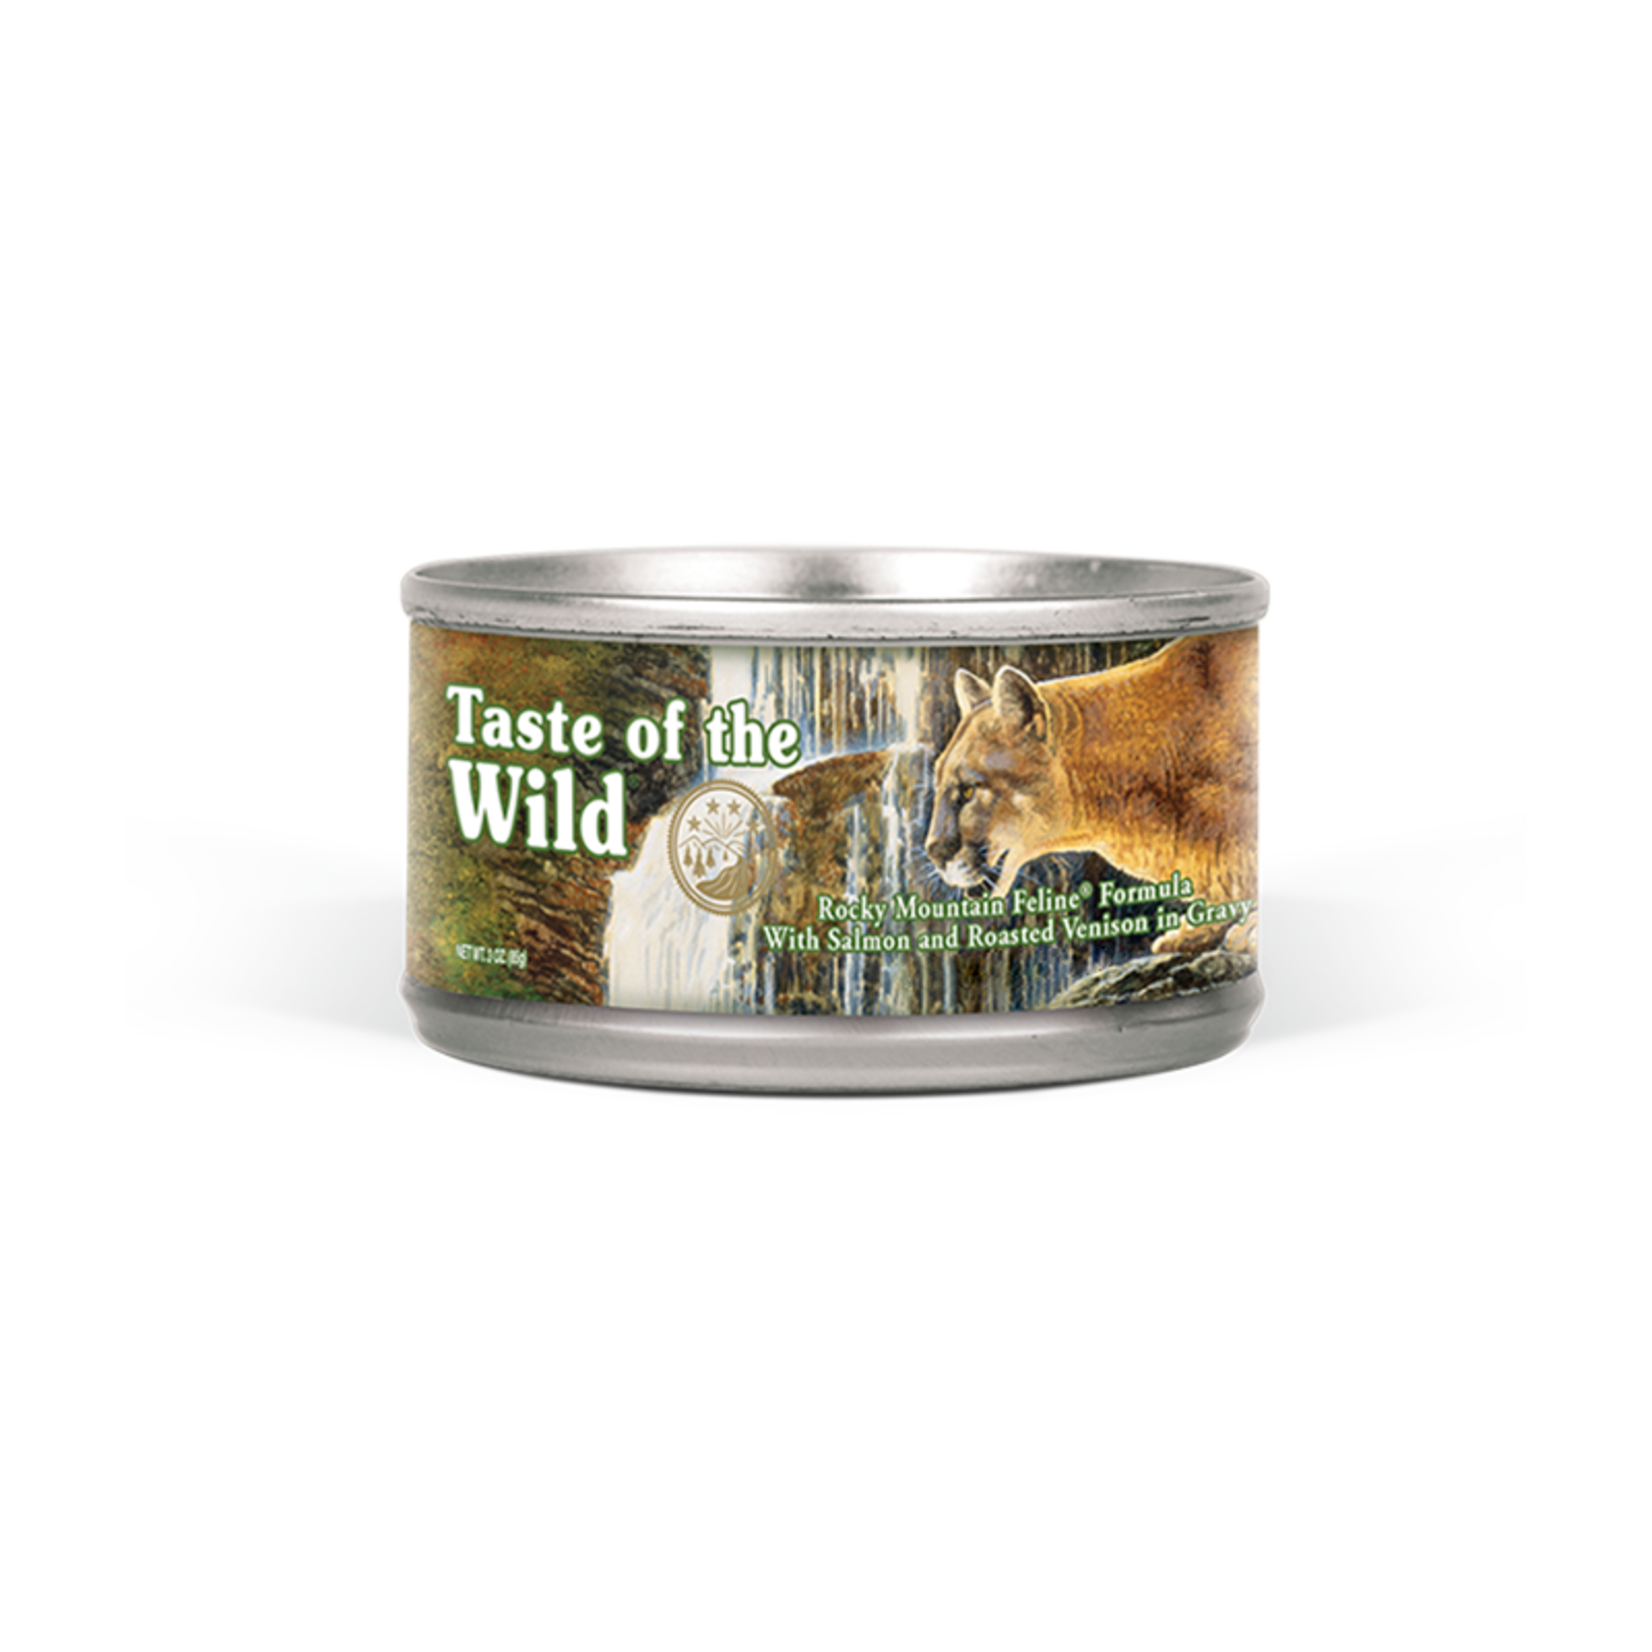 Taste of the Wild Taste of the Wild Wet Cat Food Rocky Mountain Formula with Salmon & Roasted Venison in Gravy 3oz Can Grain Free